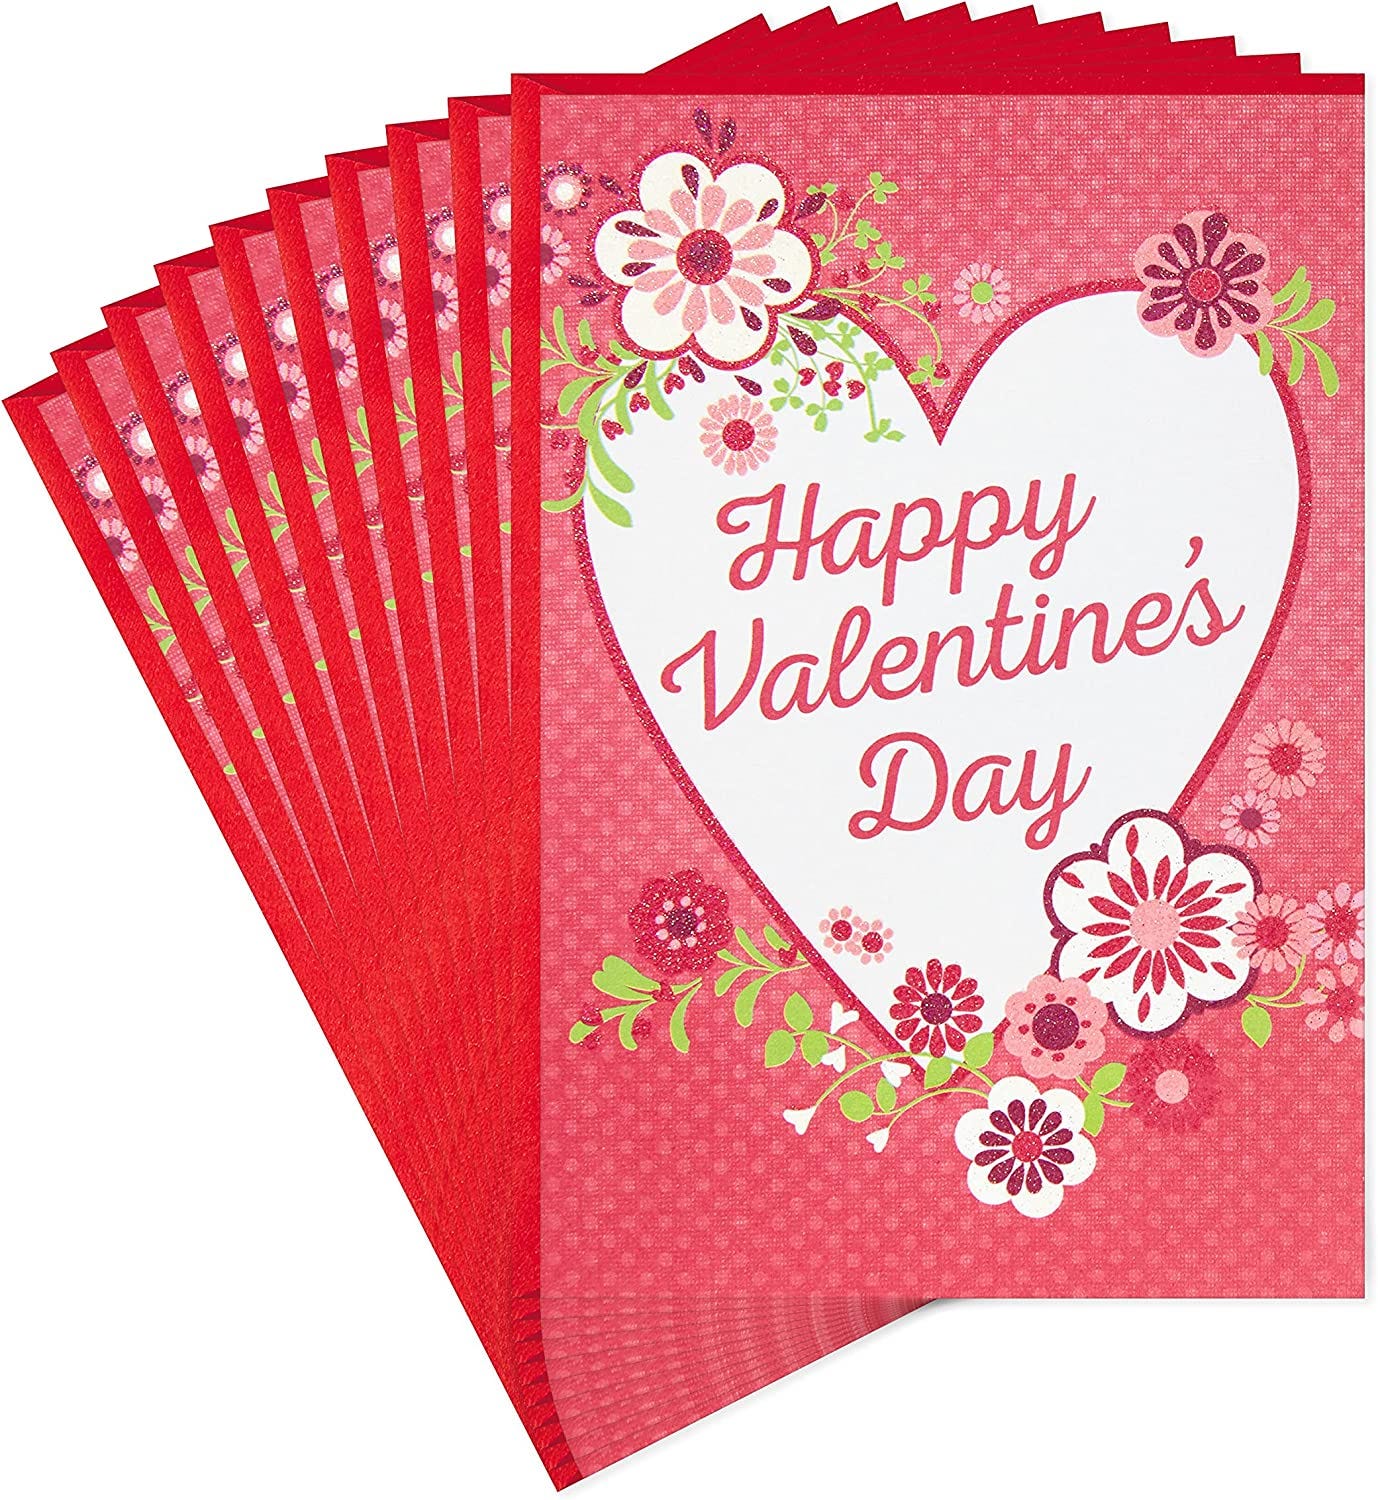 Expressing Love and Affection: A Guide to Valentine's Day Cards